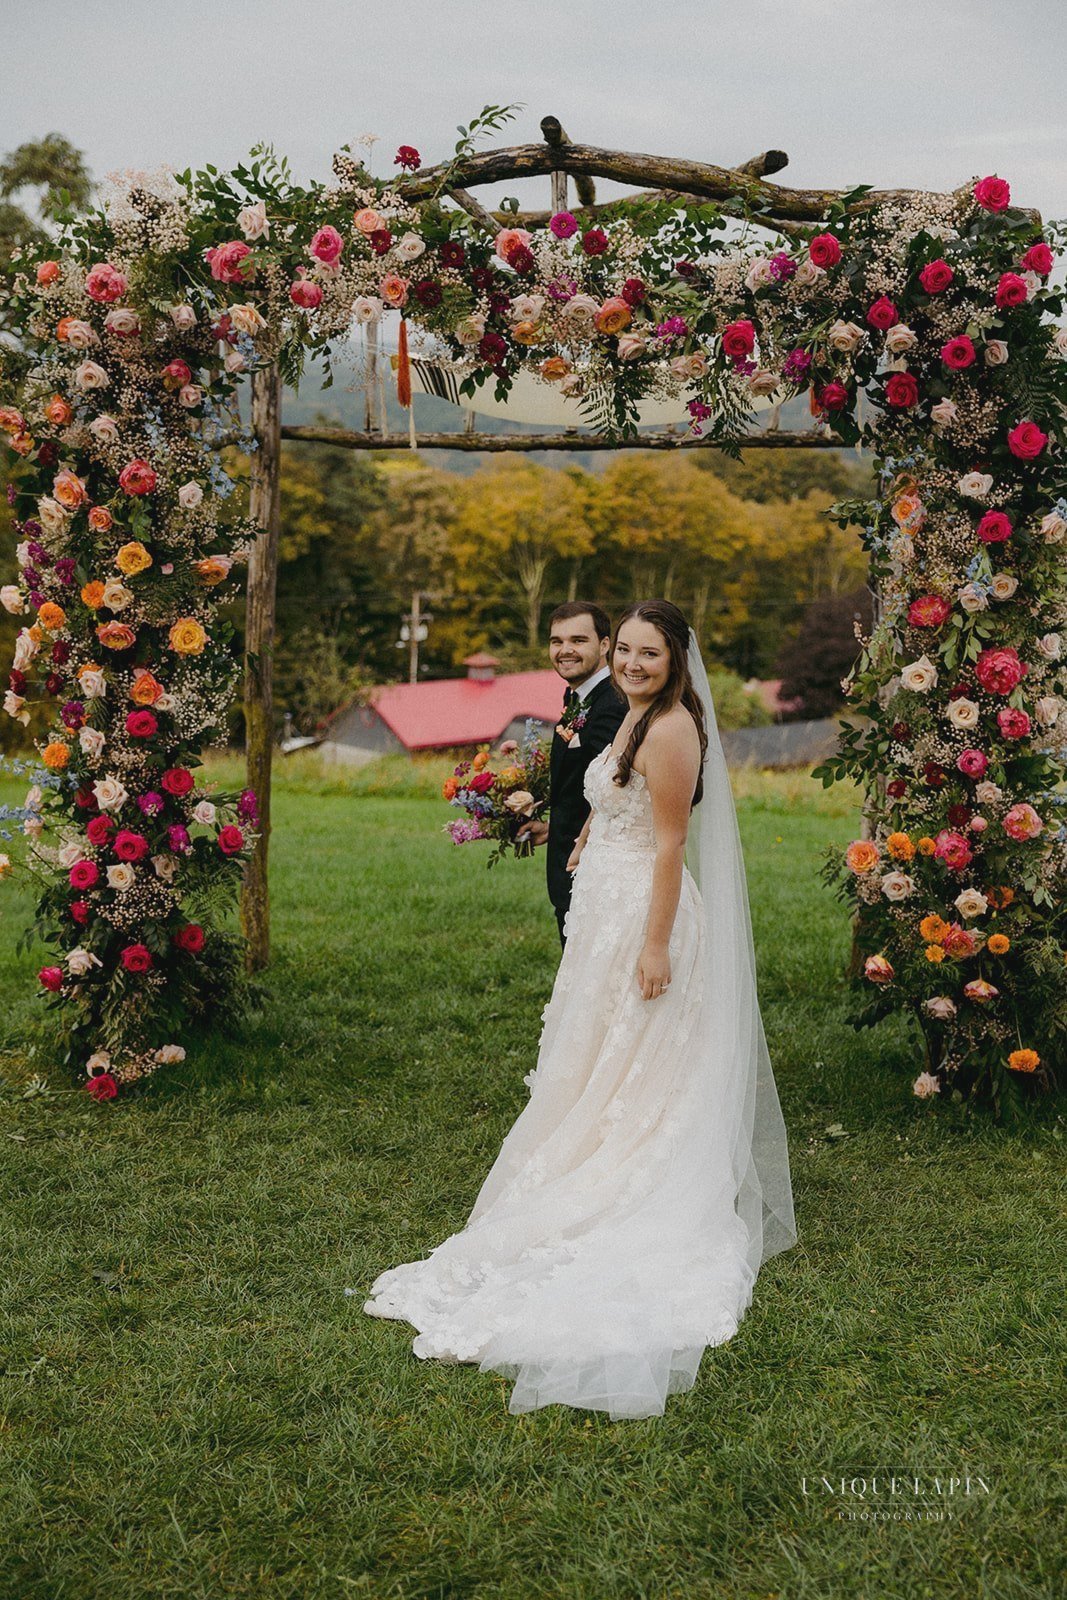 JESS + KYLE - COLOR EXPLOSION AT RED MAPLE